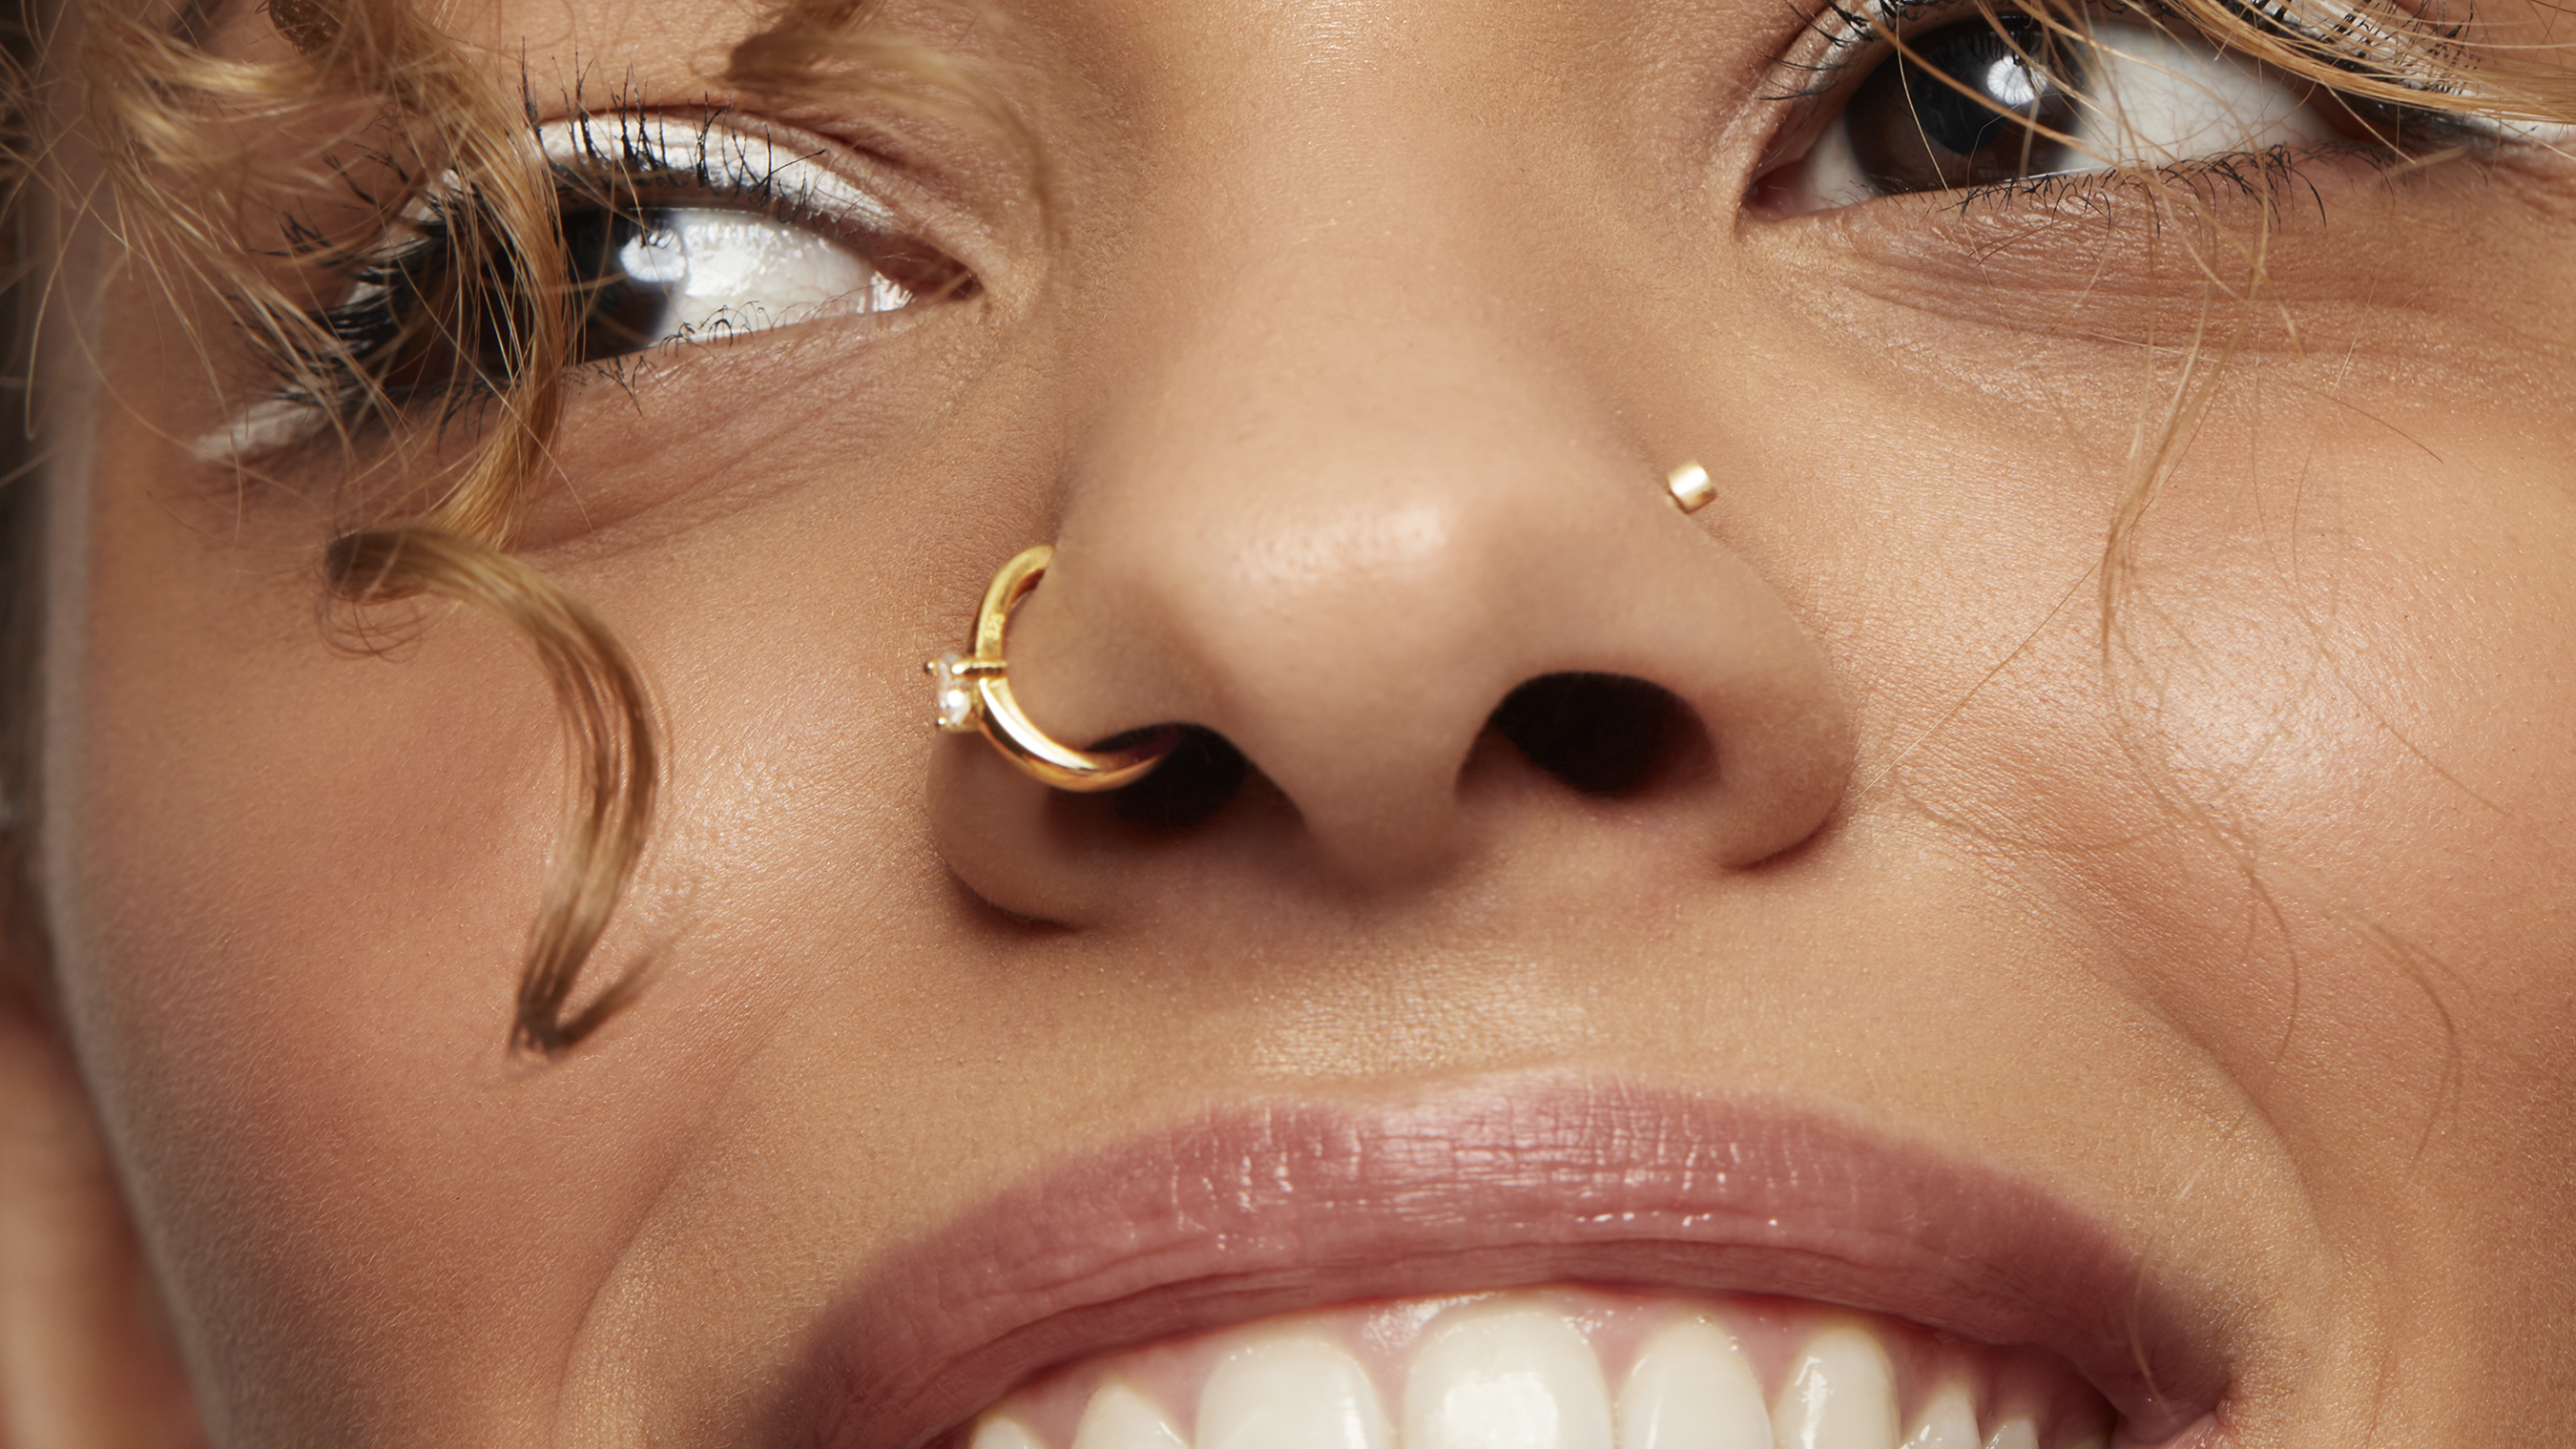 The Ear And Nose Piercing Trend Of 2020 Is Here To Stay